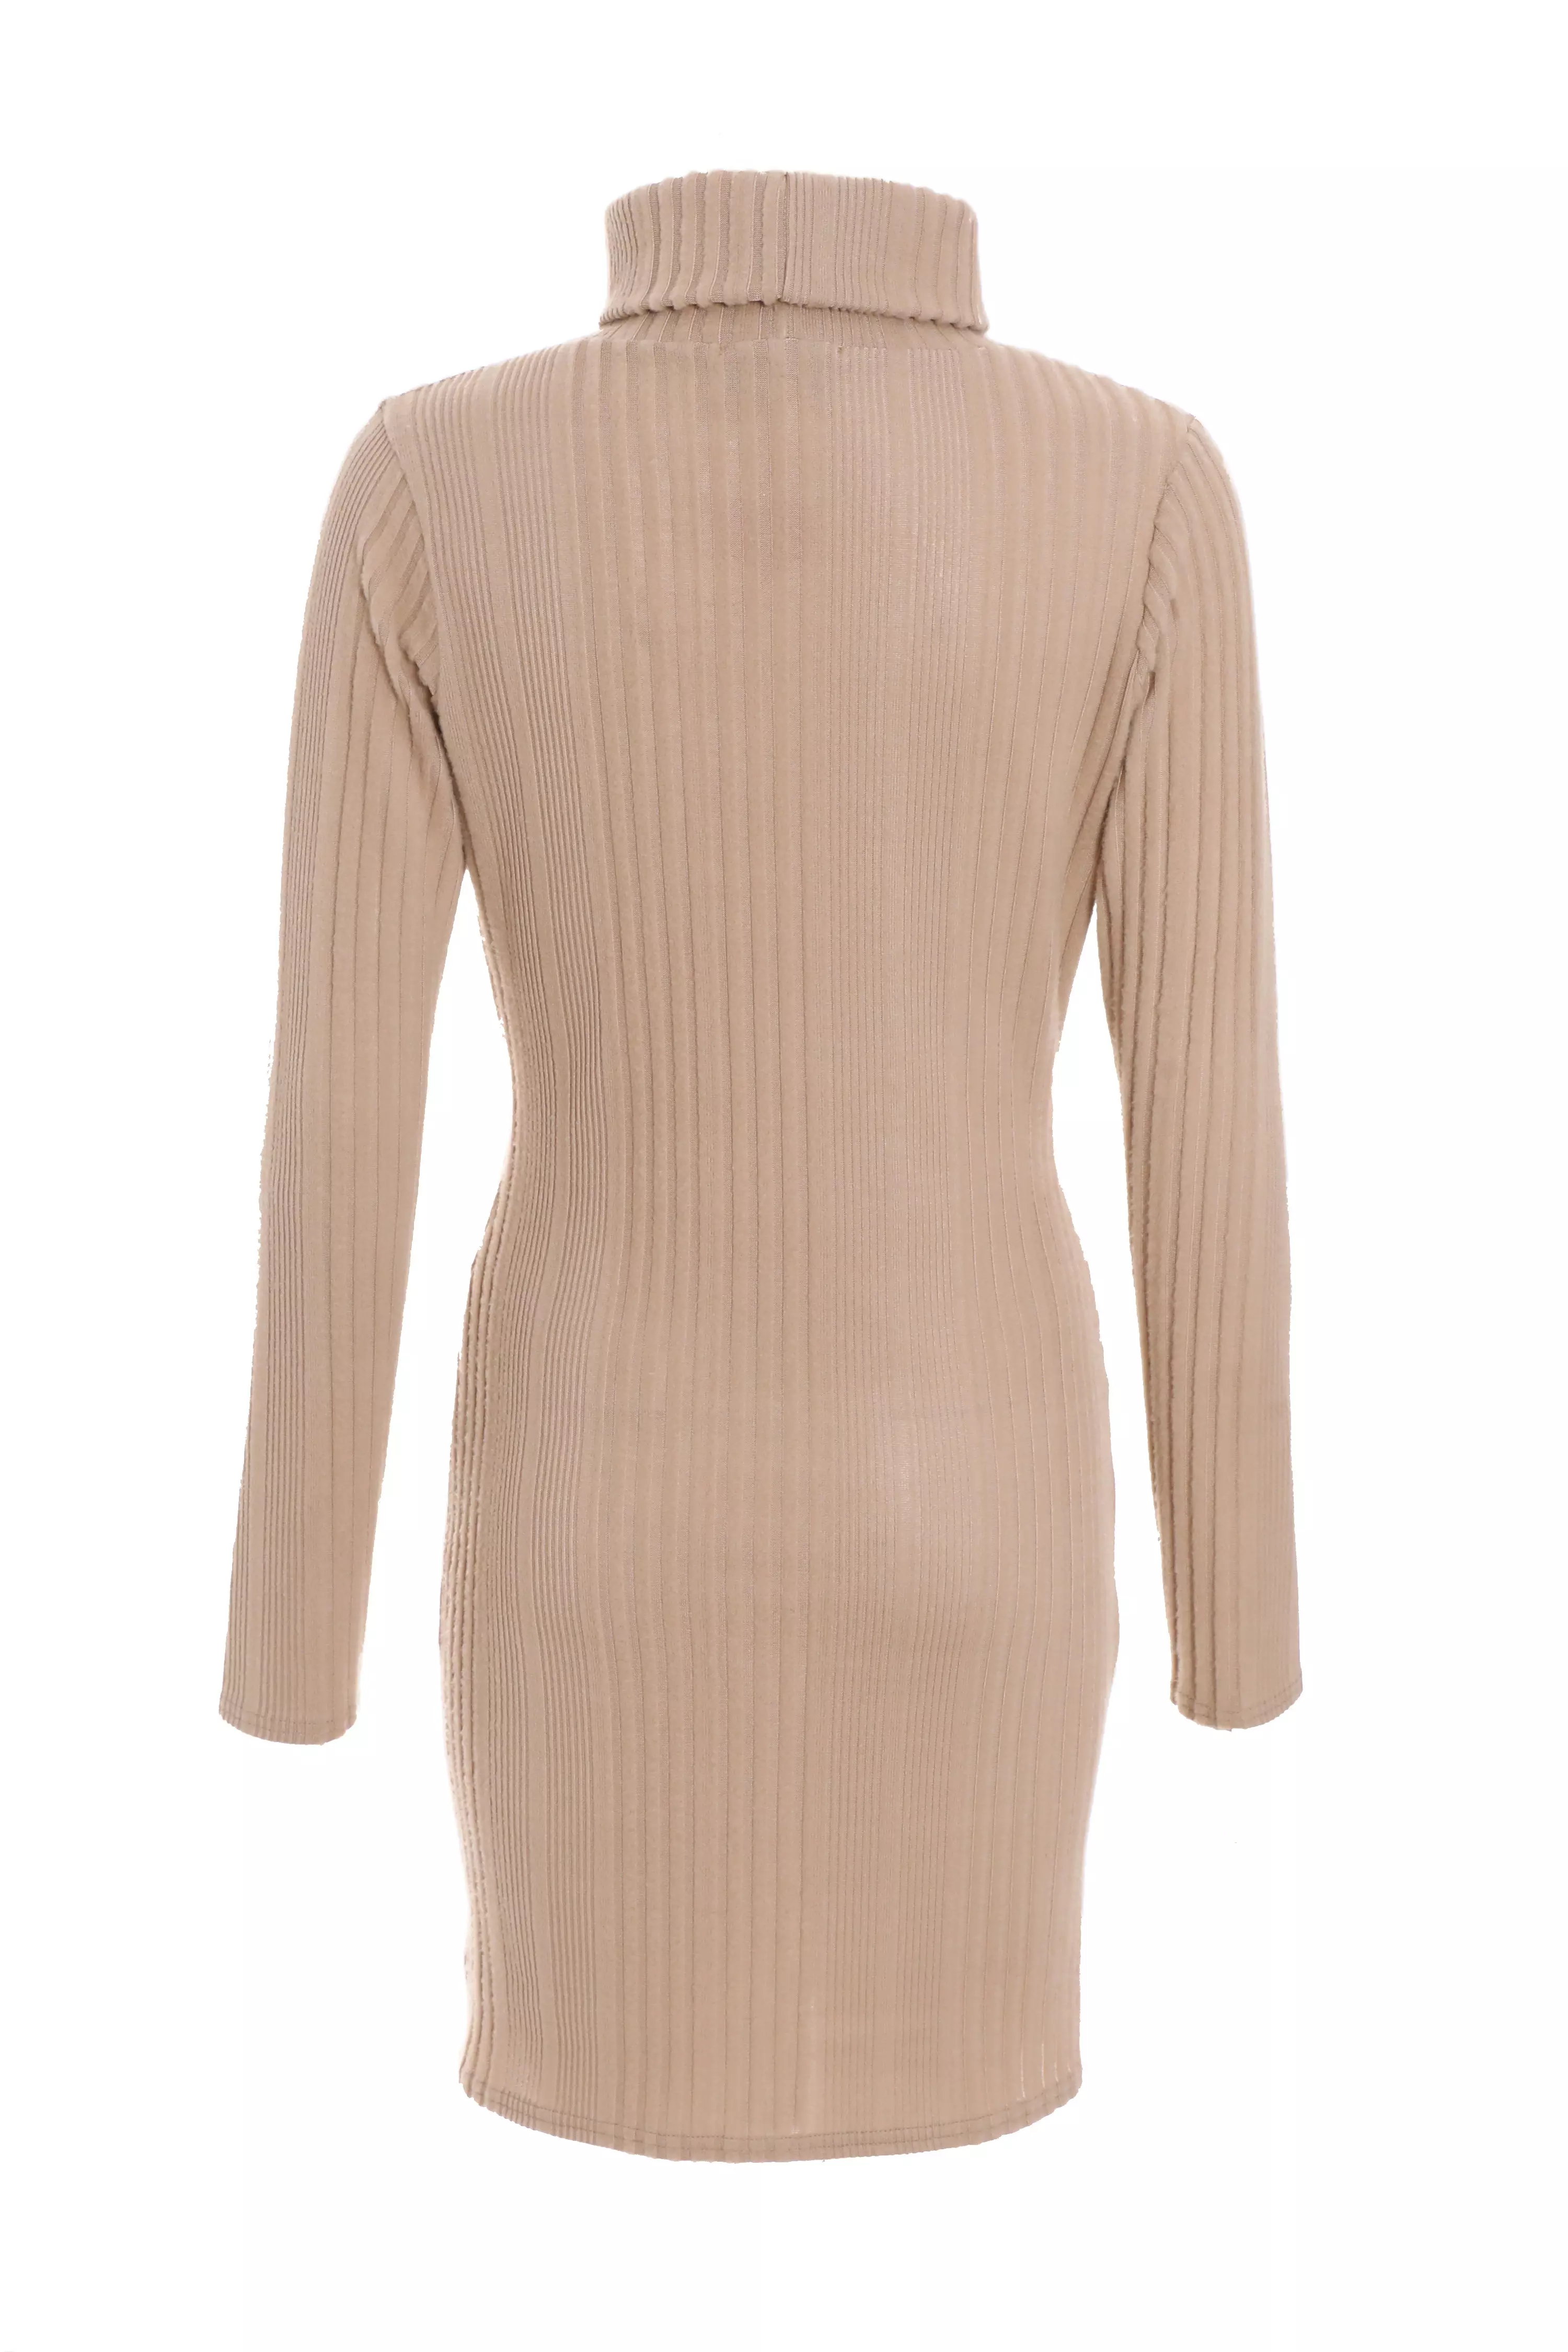 Stone Knitted High Neck Bodycon Mini Dress